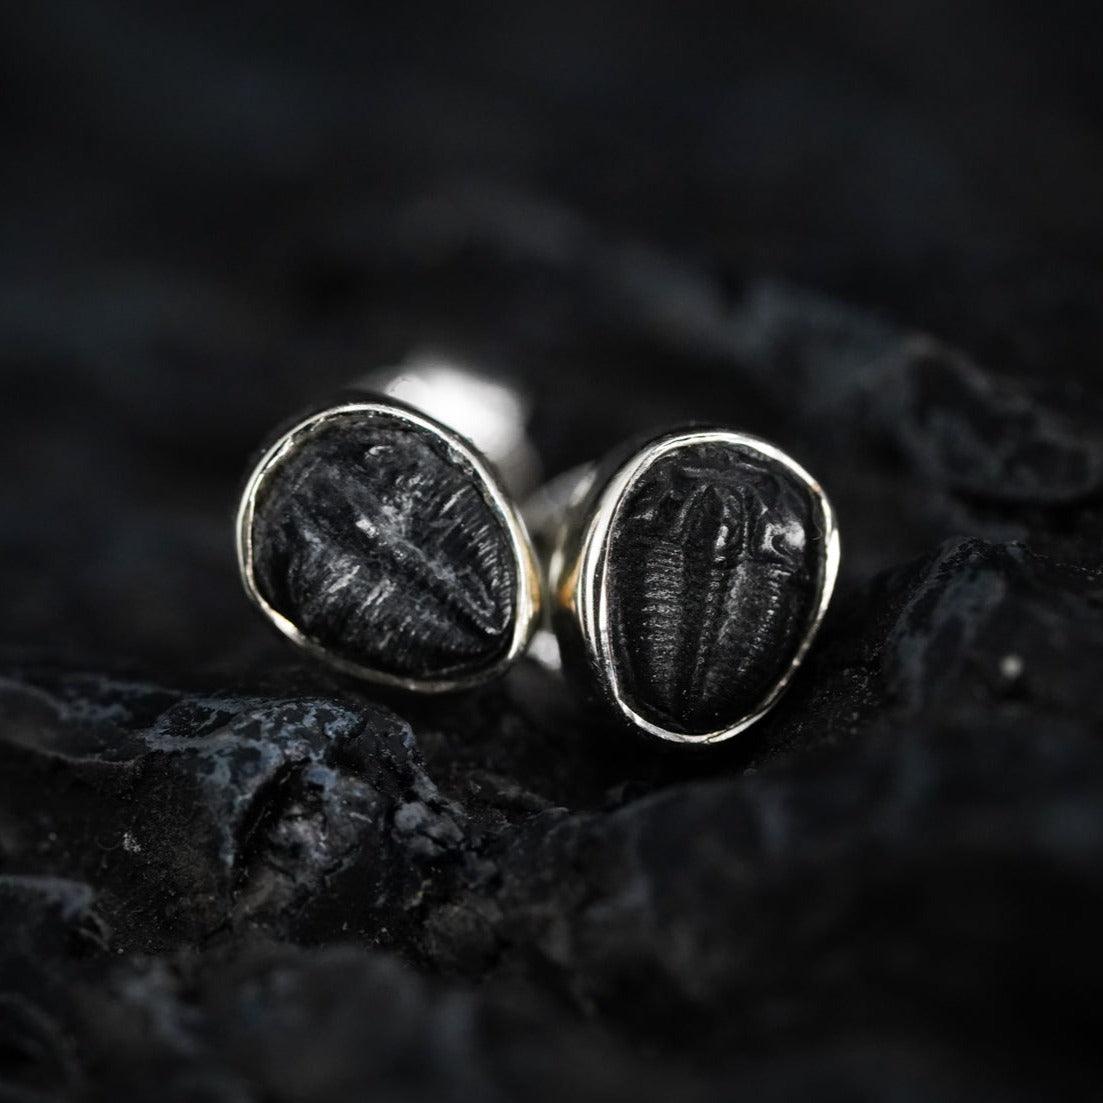 Small Trilobite stud earrings by Black Feather Design